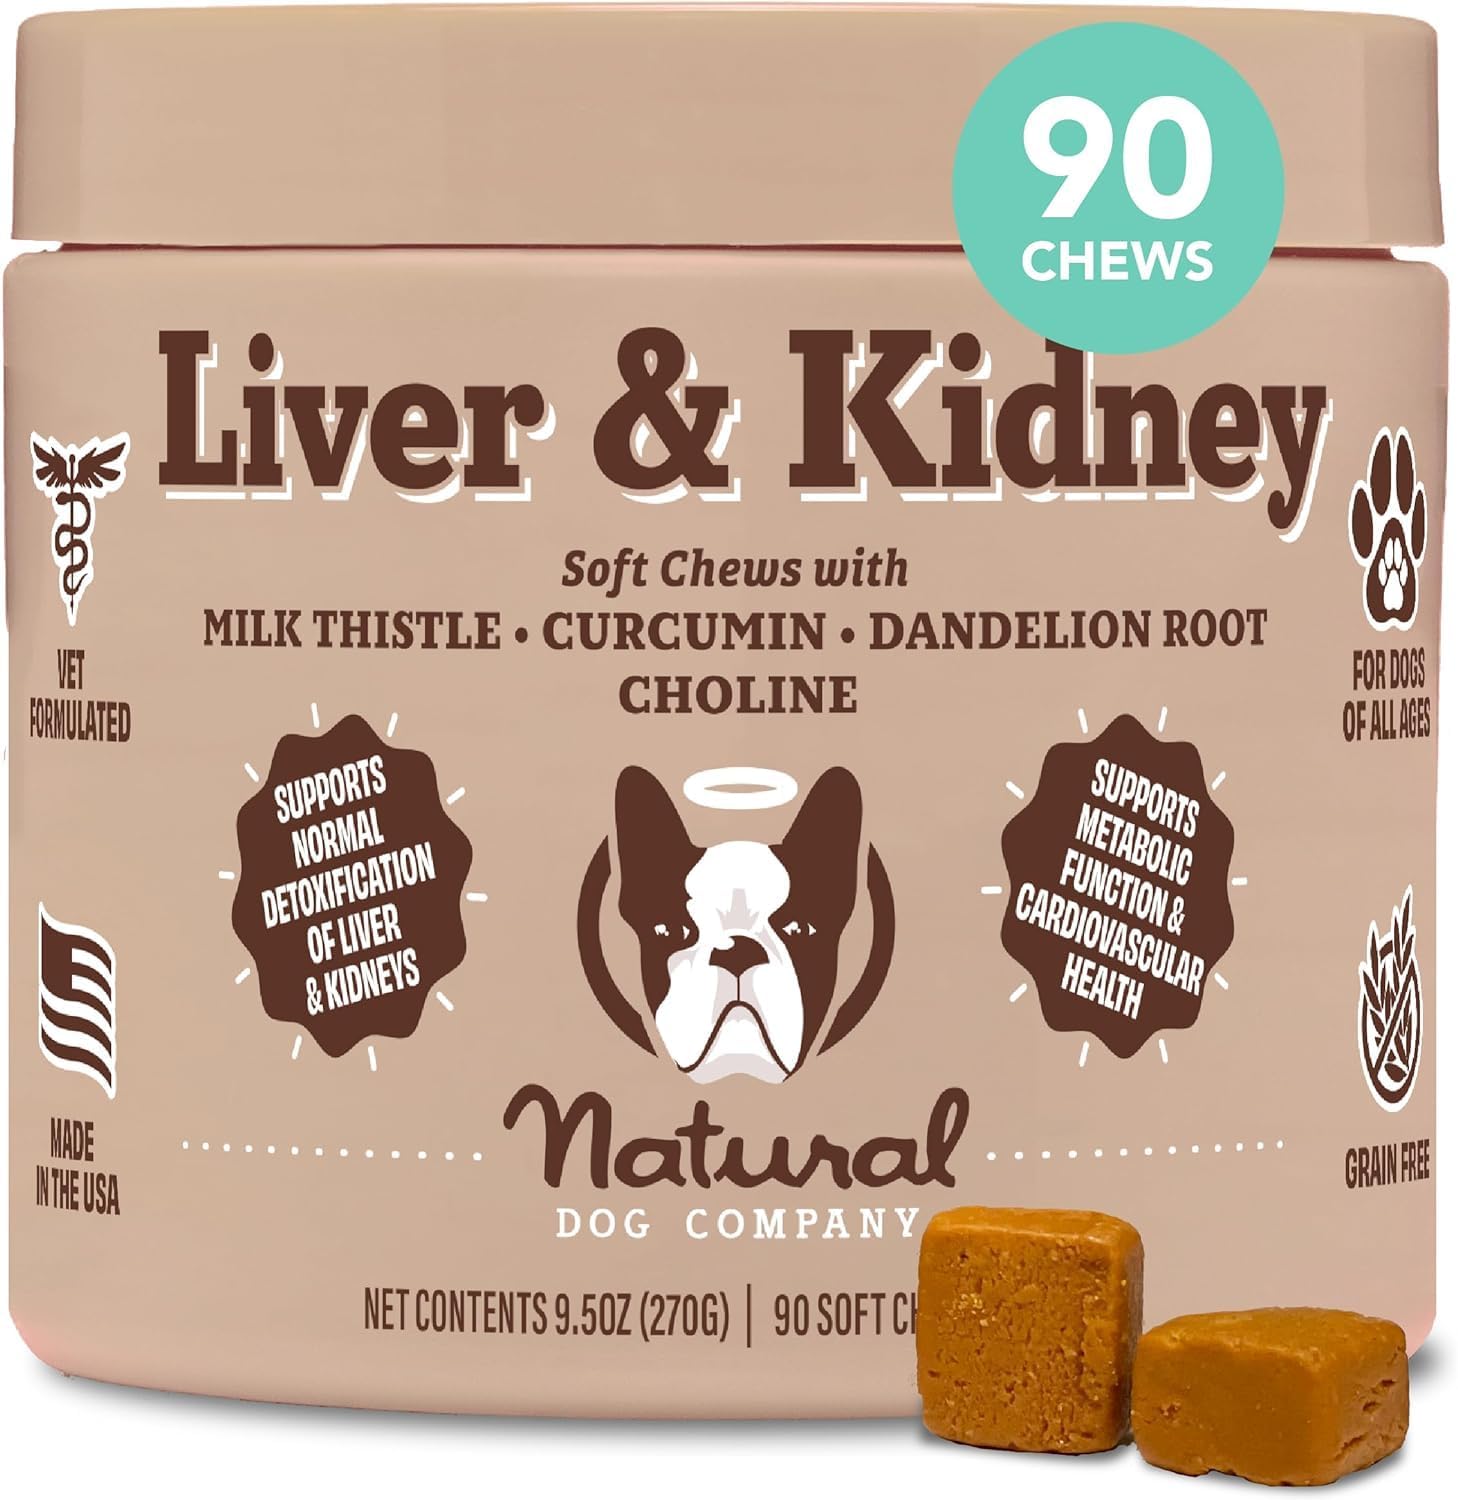 Natural Dog Company Stinky Liver & Kidney Supplement Chews - Dog Liver Support for Optimal Health - Turkey Flavored Treats - Promotes Digestion and Immune Health – Milk Thistle for Dogs (90 Chews)